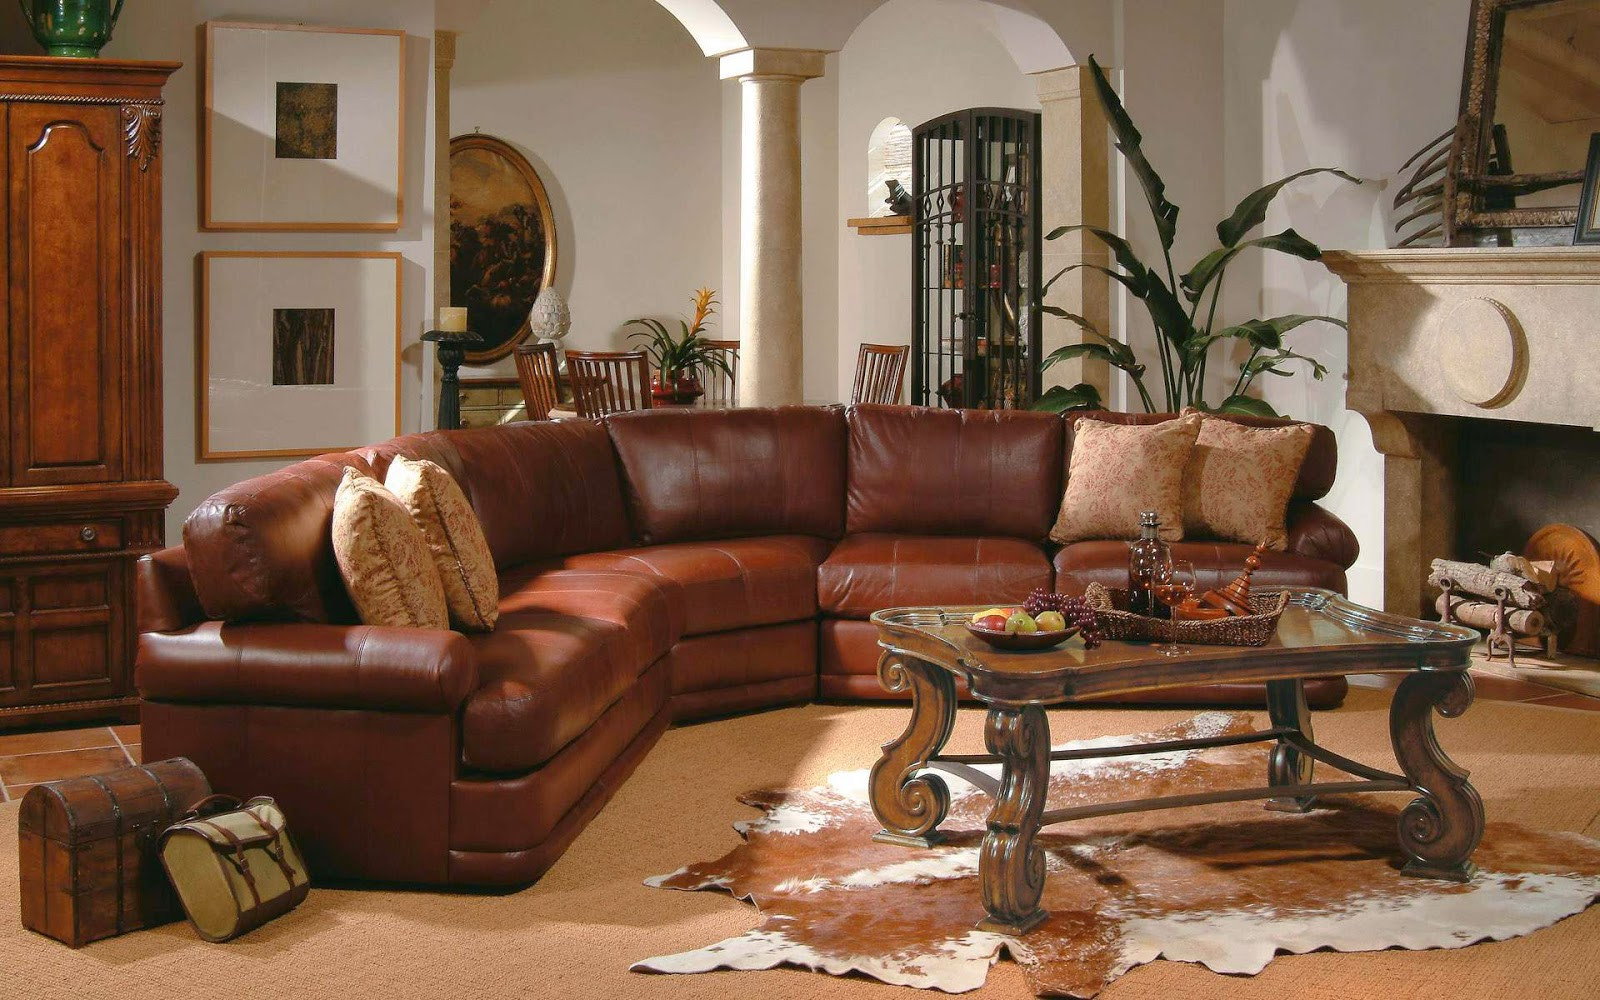 Brown Couches Living Room Ideas
 6 Living Room Decor Ideas With Sectional